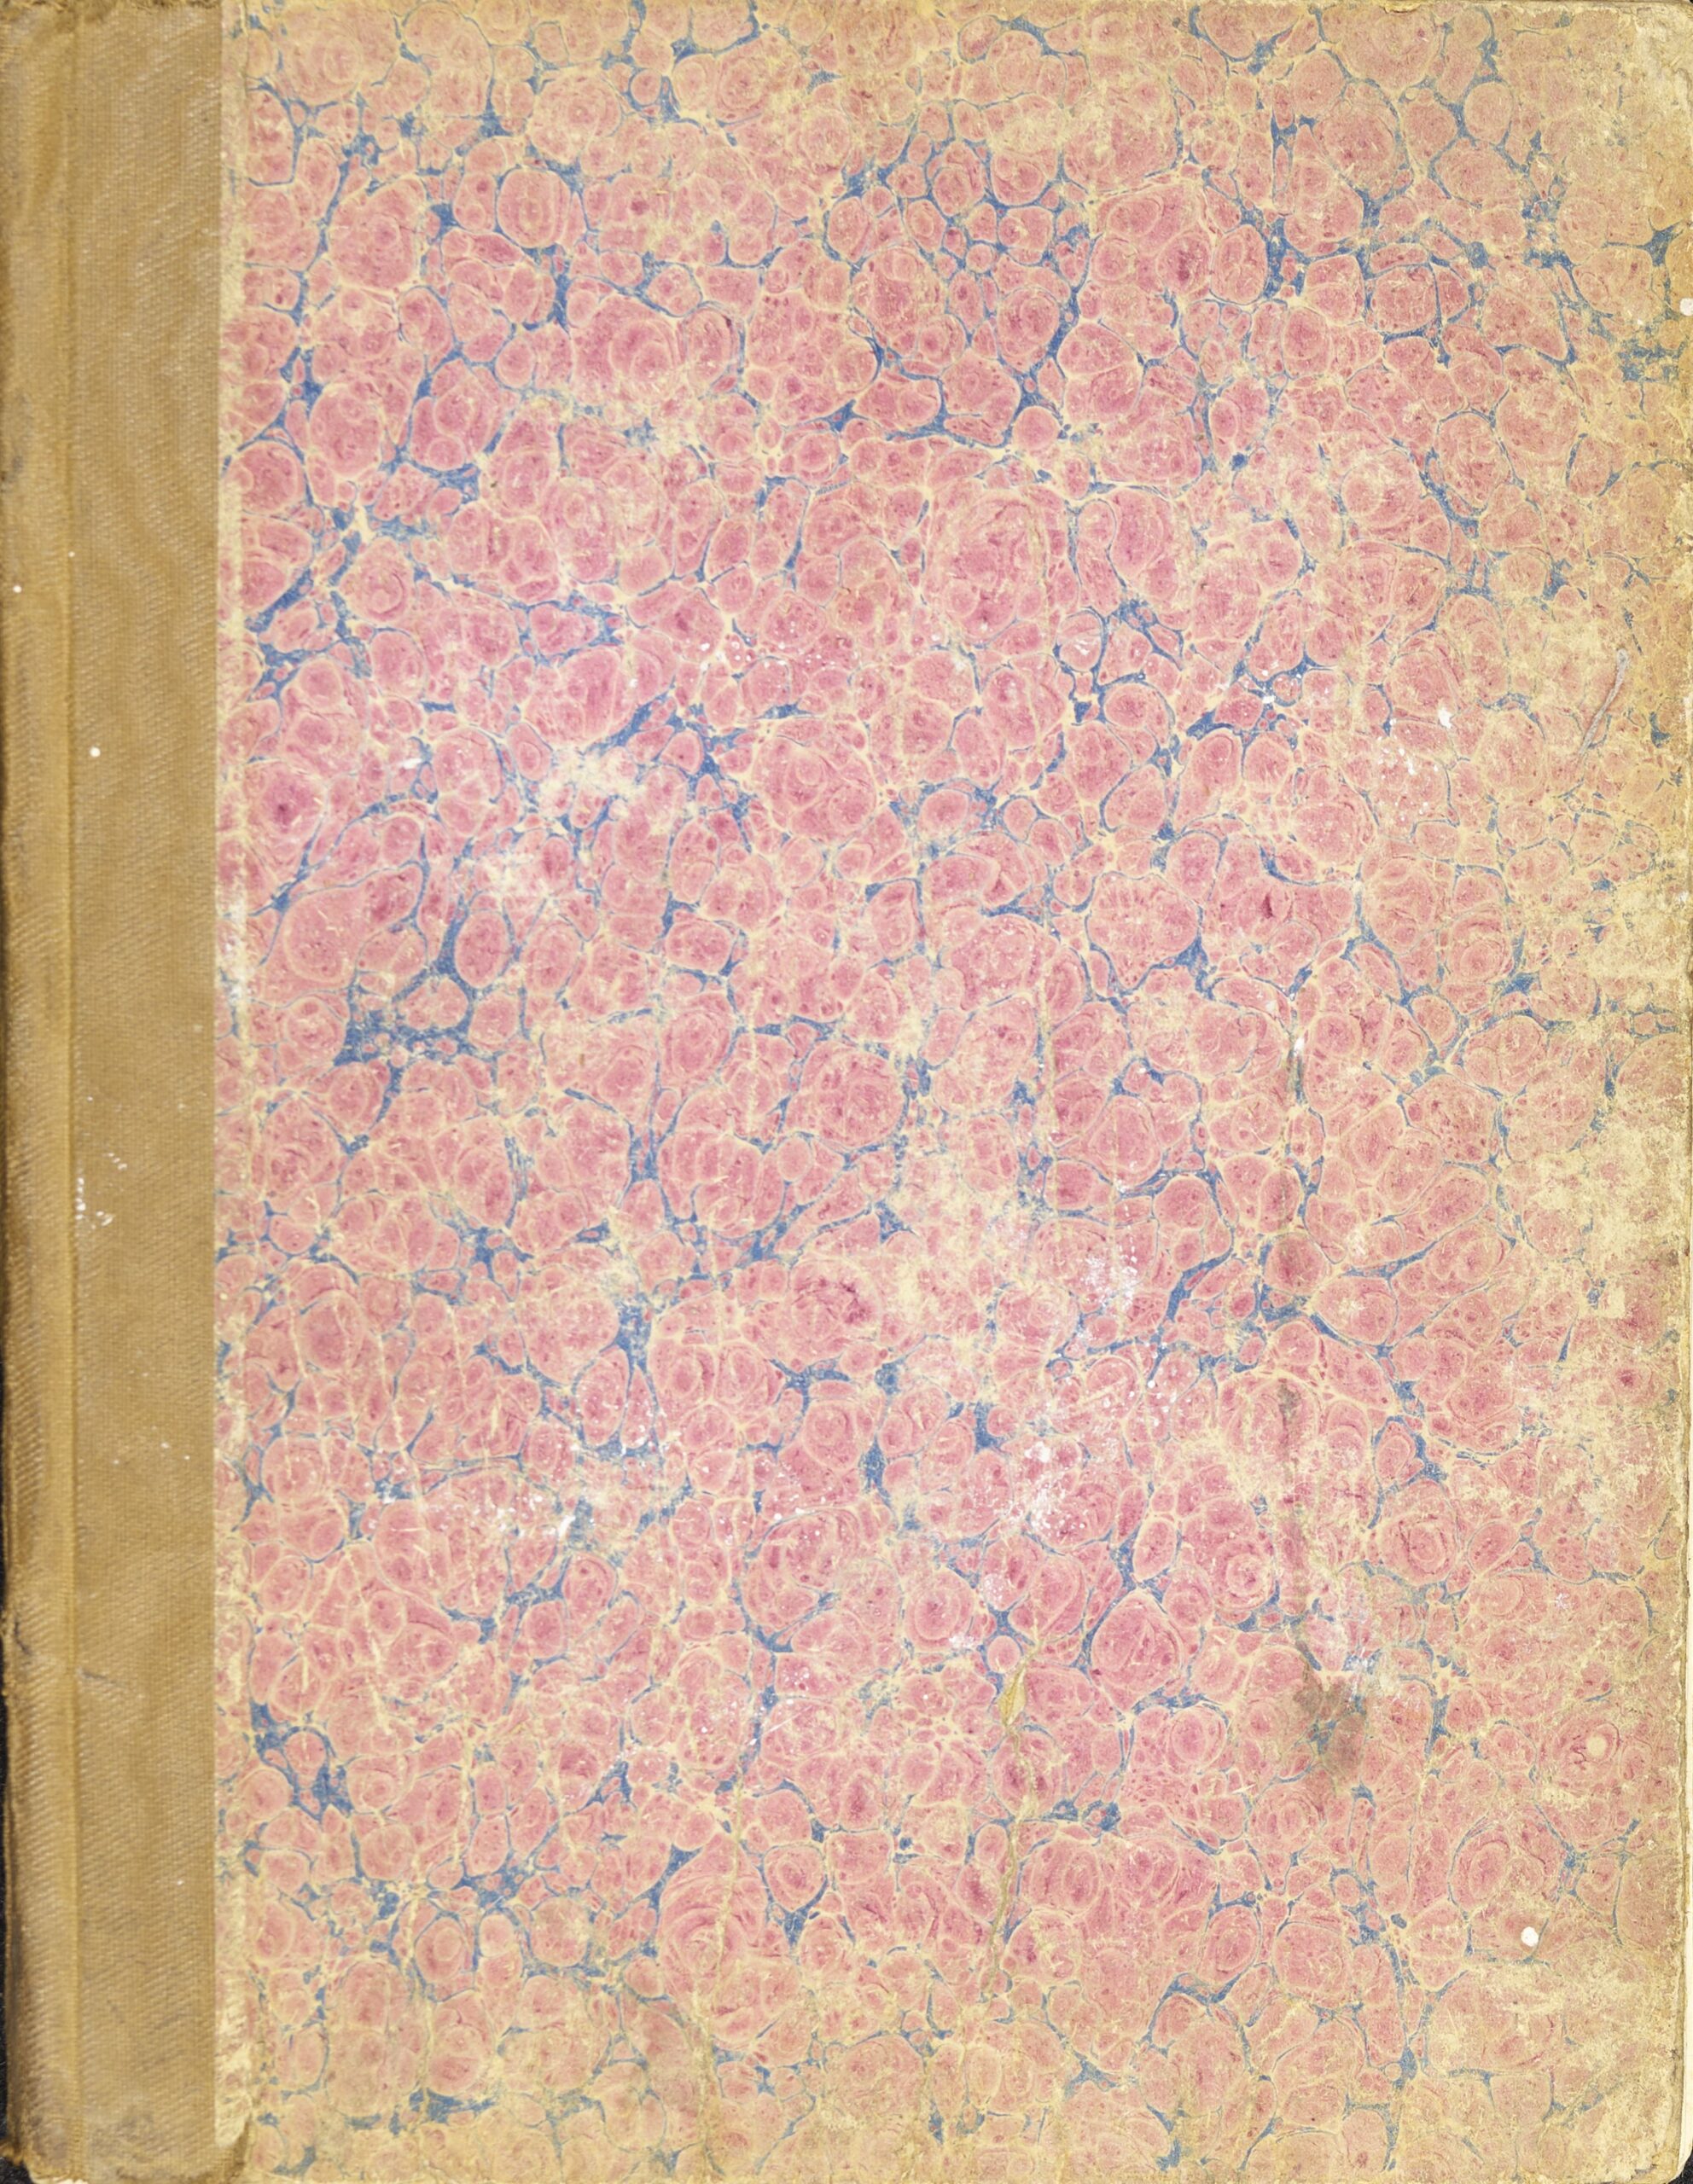 Red marbled notebook, belonging to K.B. McFarlane from his schooldays.